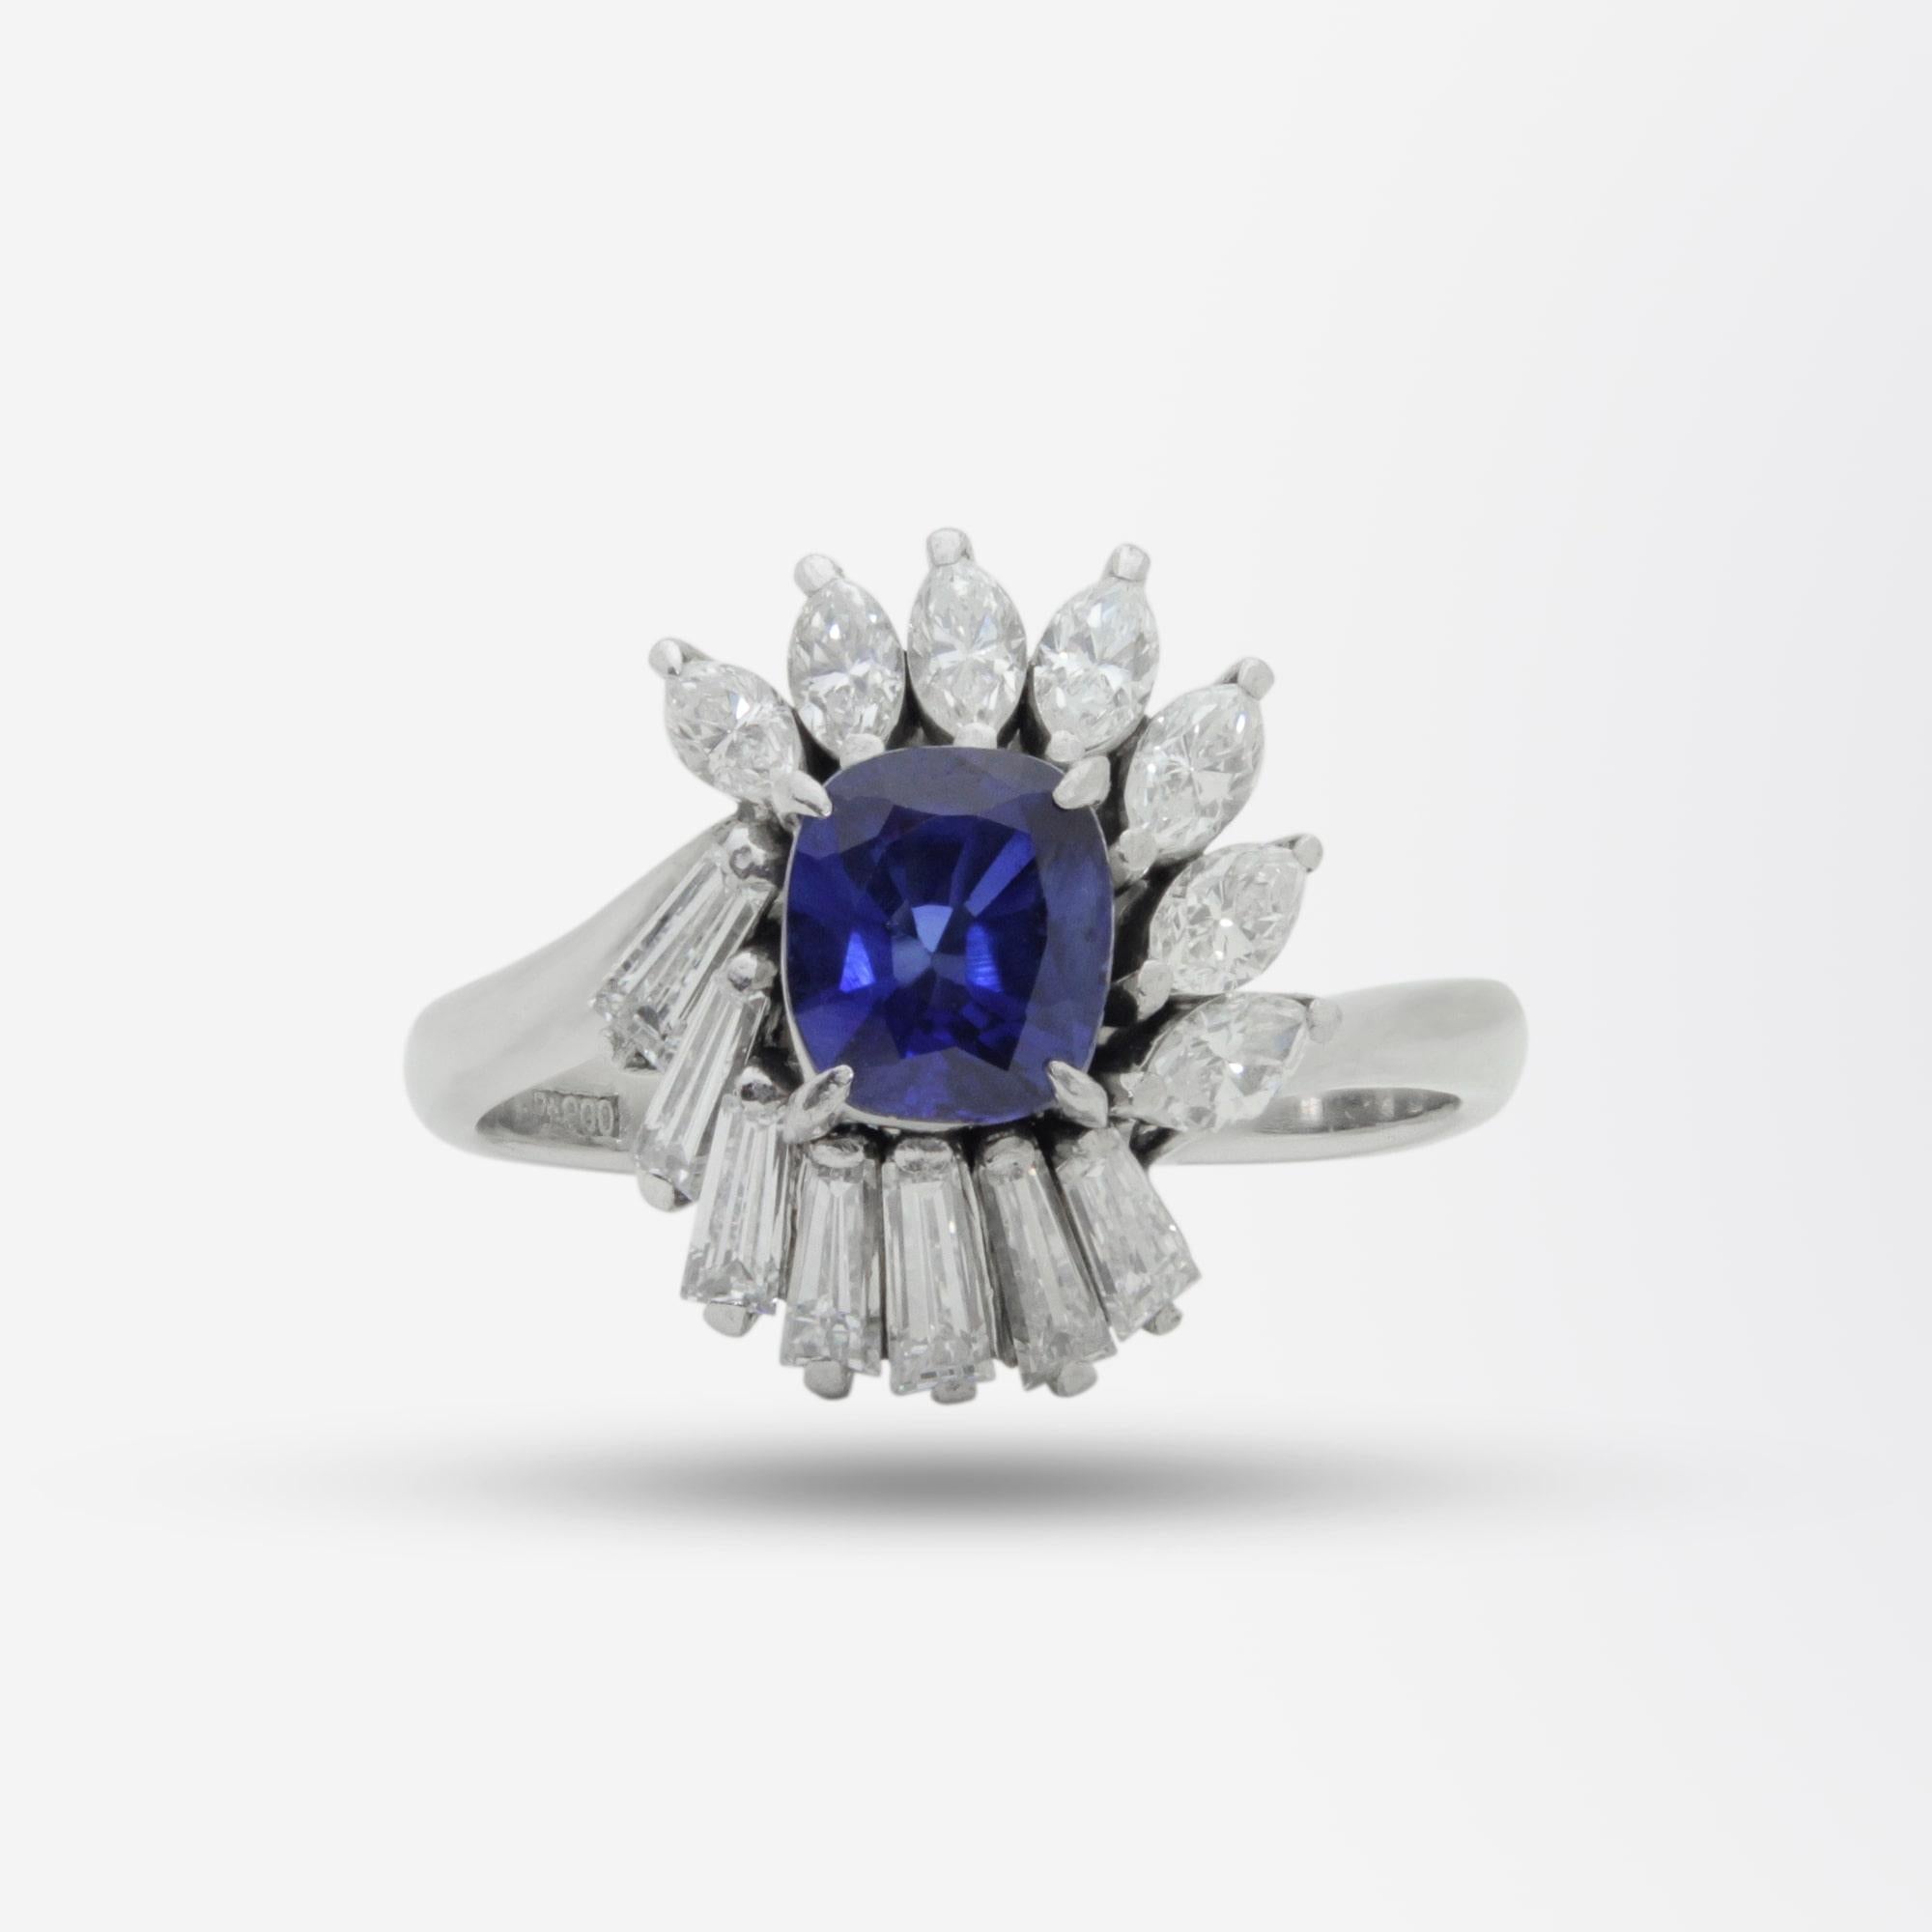 A fine ladies dress ring crafted from platinum and set with a sapphire and diamonds. The central sapphire is a 0.98 carat Cambodian cushion cut stone which has an accompanying GIA certification. Surrounding this sapphire is a mixture of tapered